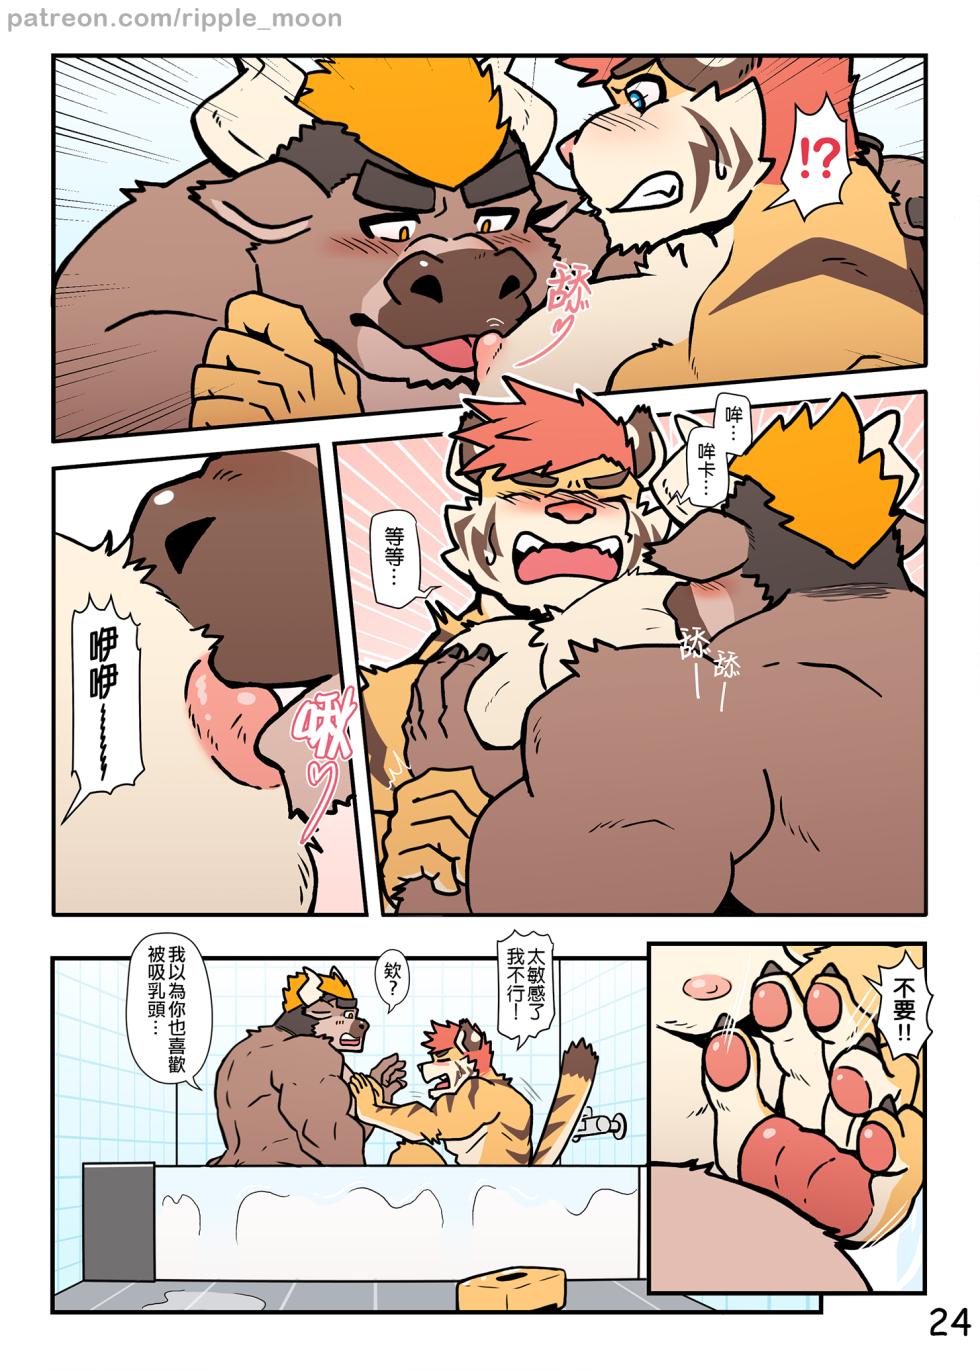 [Ripple Moon] My Milky Roomie 2: Milk Bath (Ongoing) [Chinese] (Flat Color) - Page 26